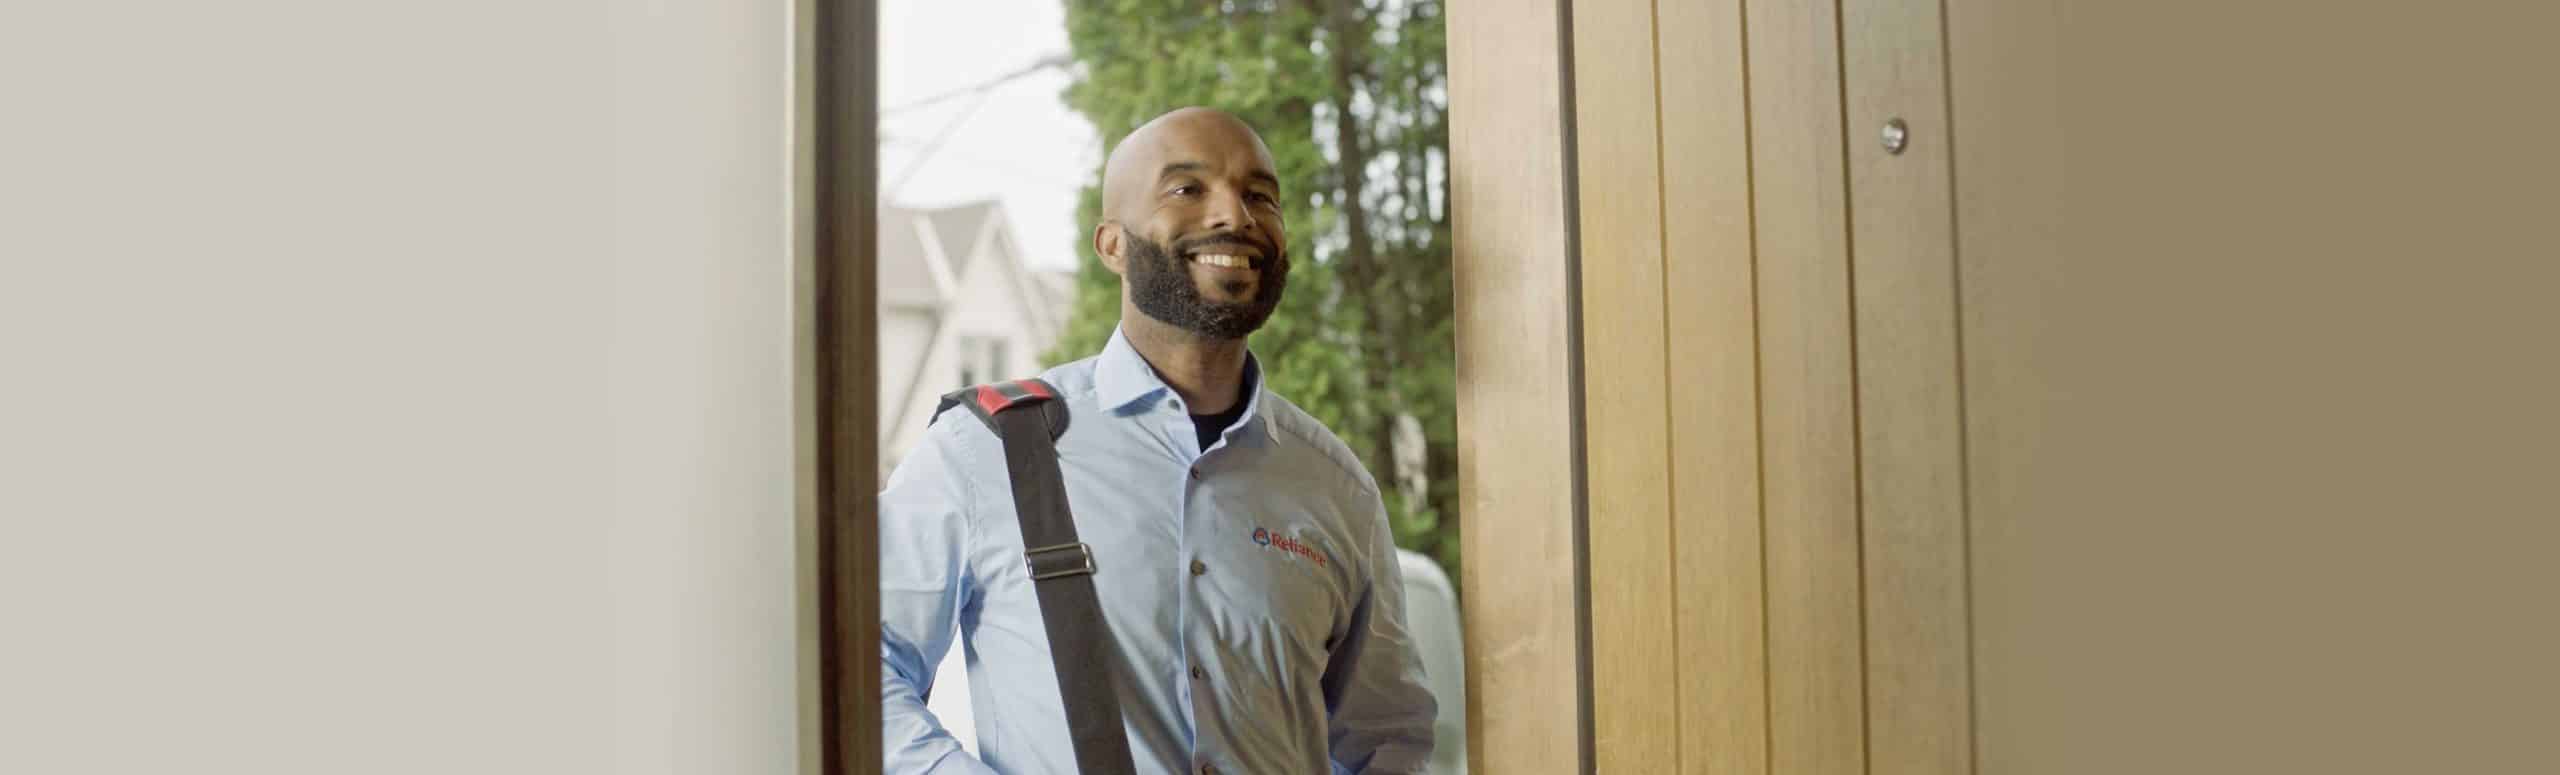 Male individual entering the front door of a house with a big smile